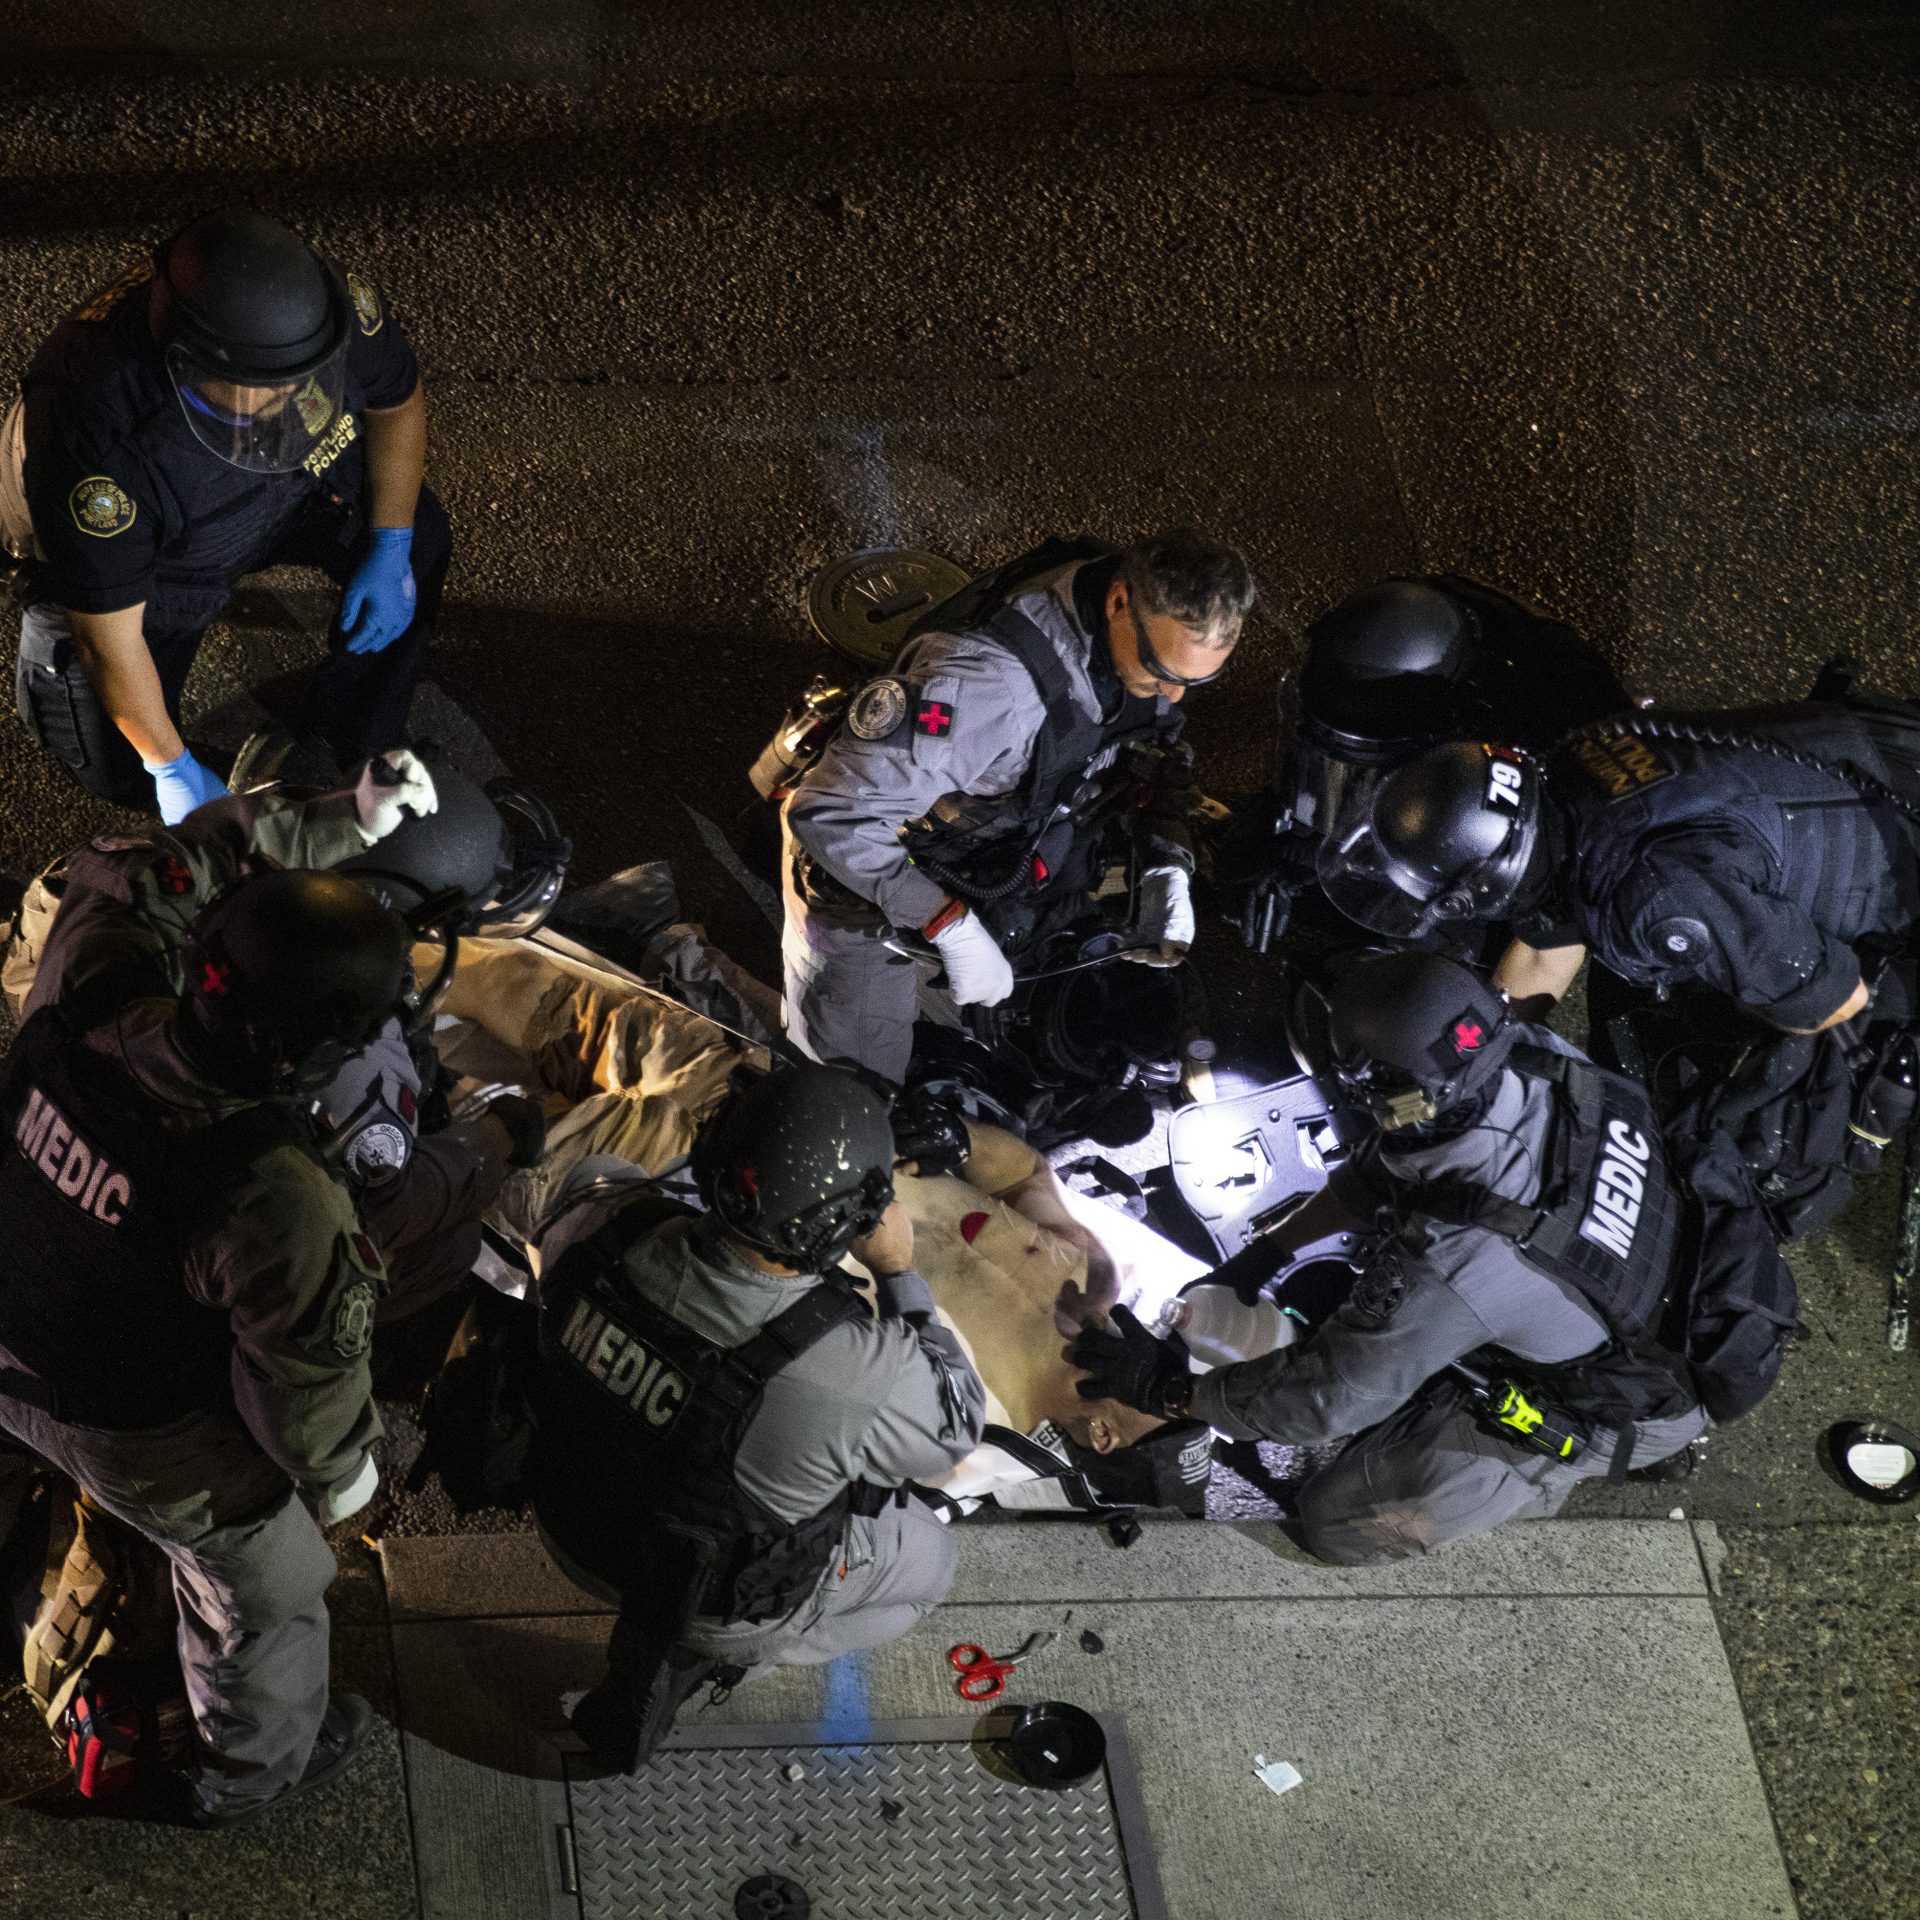 A man is treated after being shot Saturday, Aug. 29, 2020, in Portland, Ore. It wasn’t clear if the fatal shooting late Saturday was linked to fights that broke out as a caravan of about 600 vehicles was confronted by counterdemonstrators in the city’s downtown.